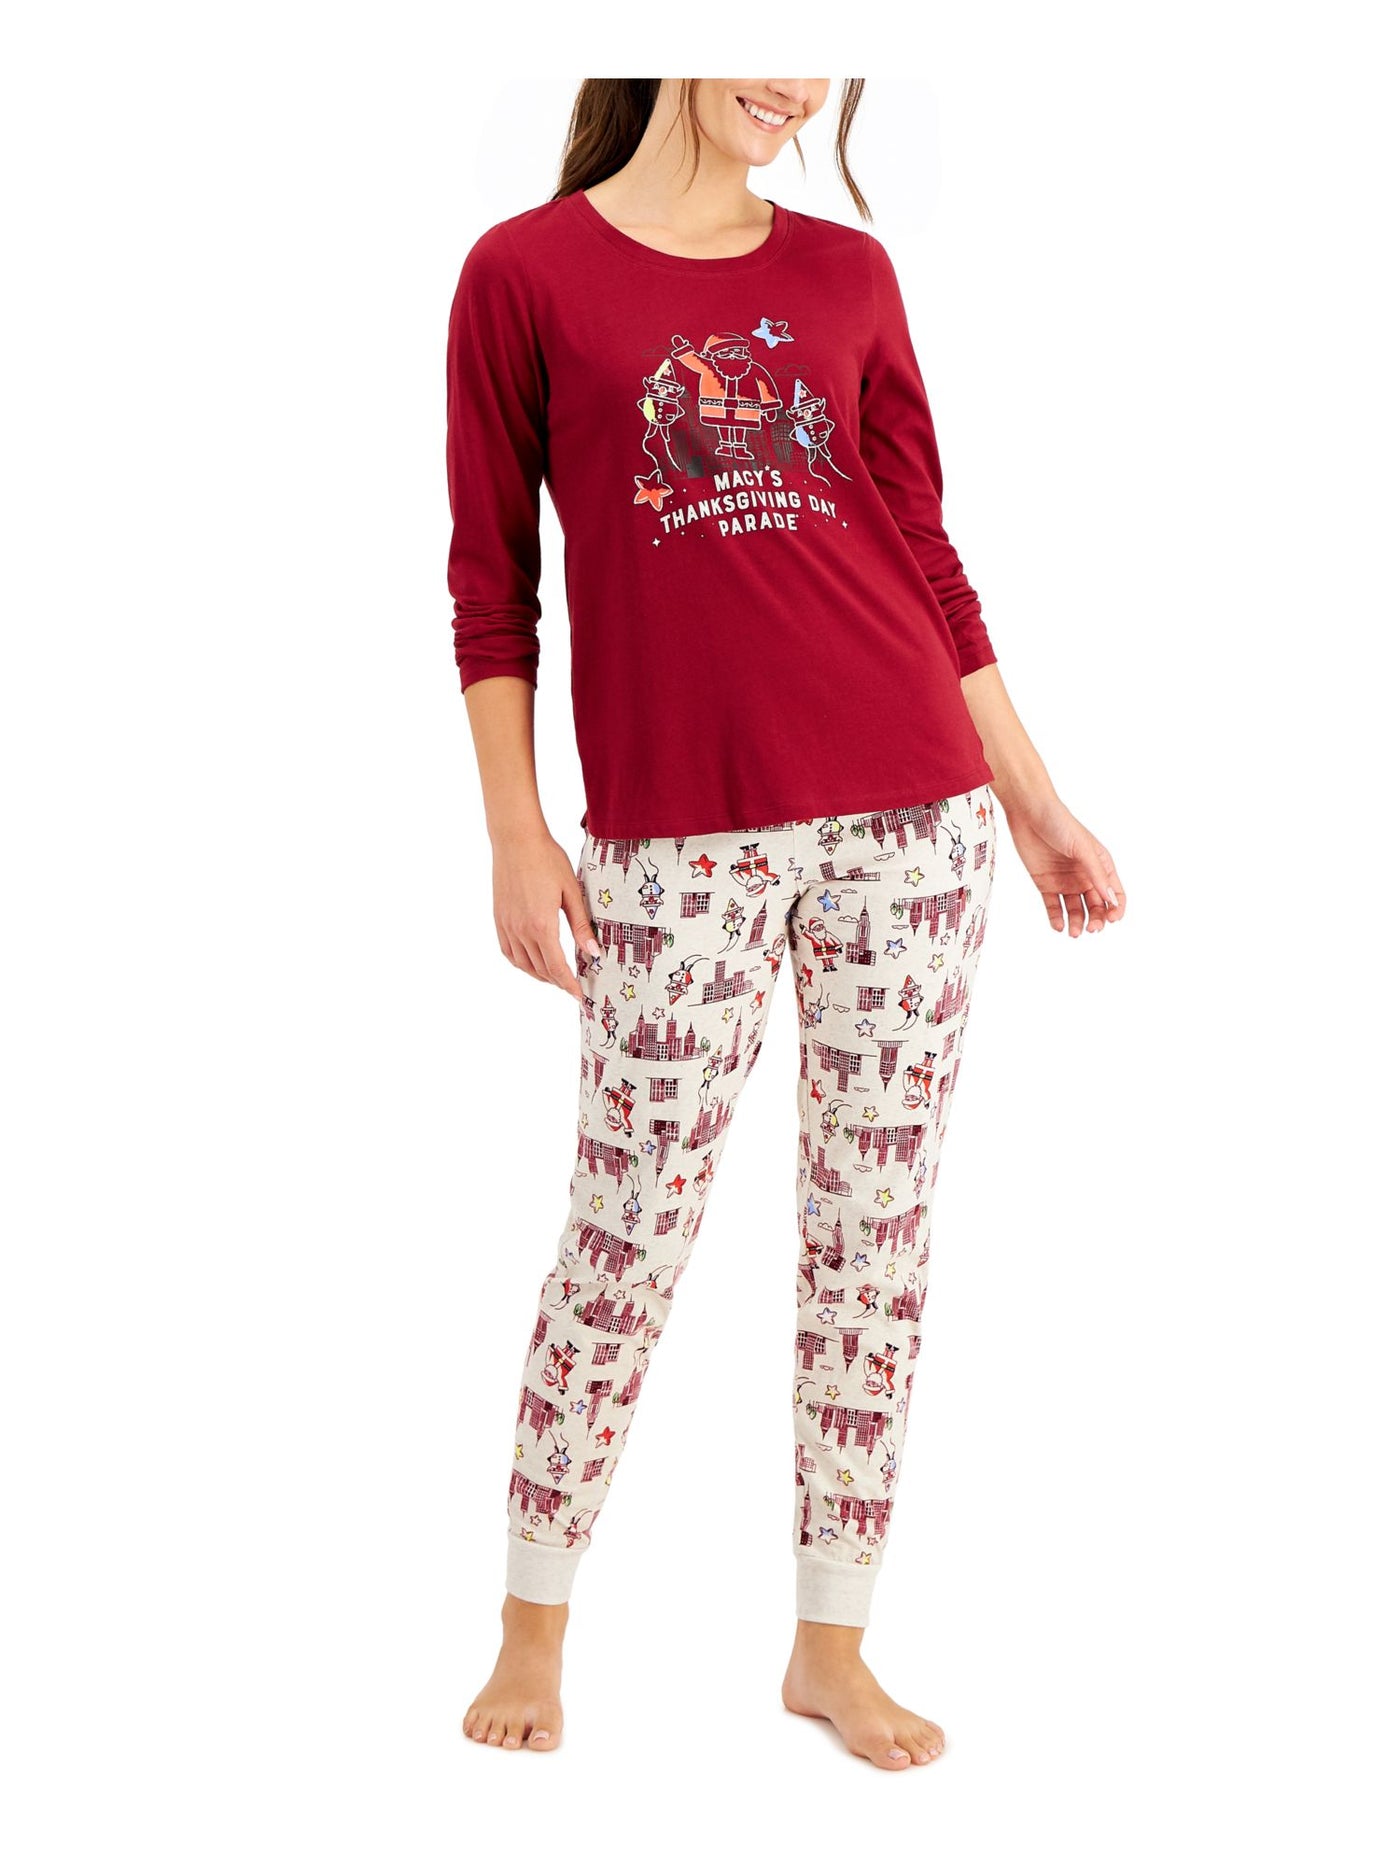 FAMILY PJs Womens Red Graphic Top Elastic Band Long Sleeve Lounge Pants Pajamas M